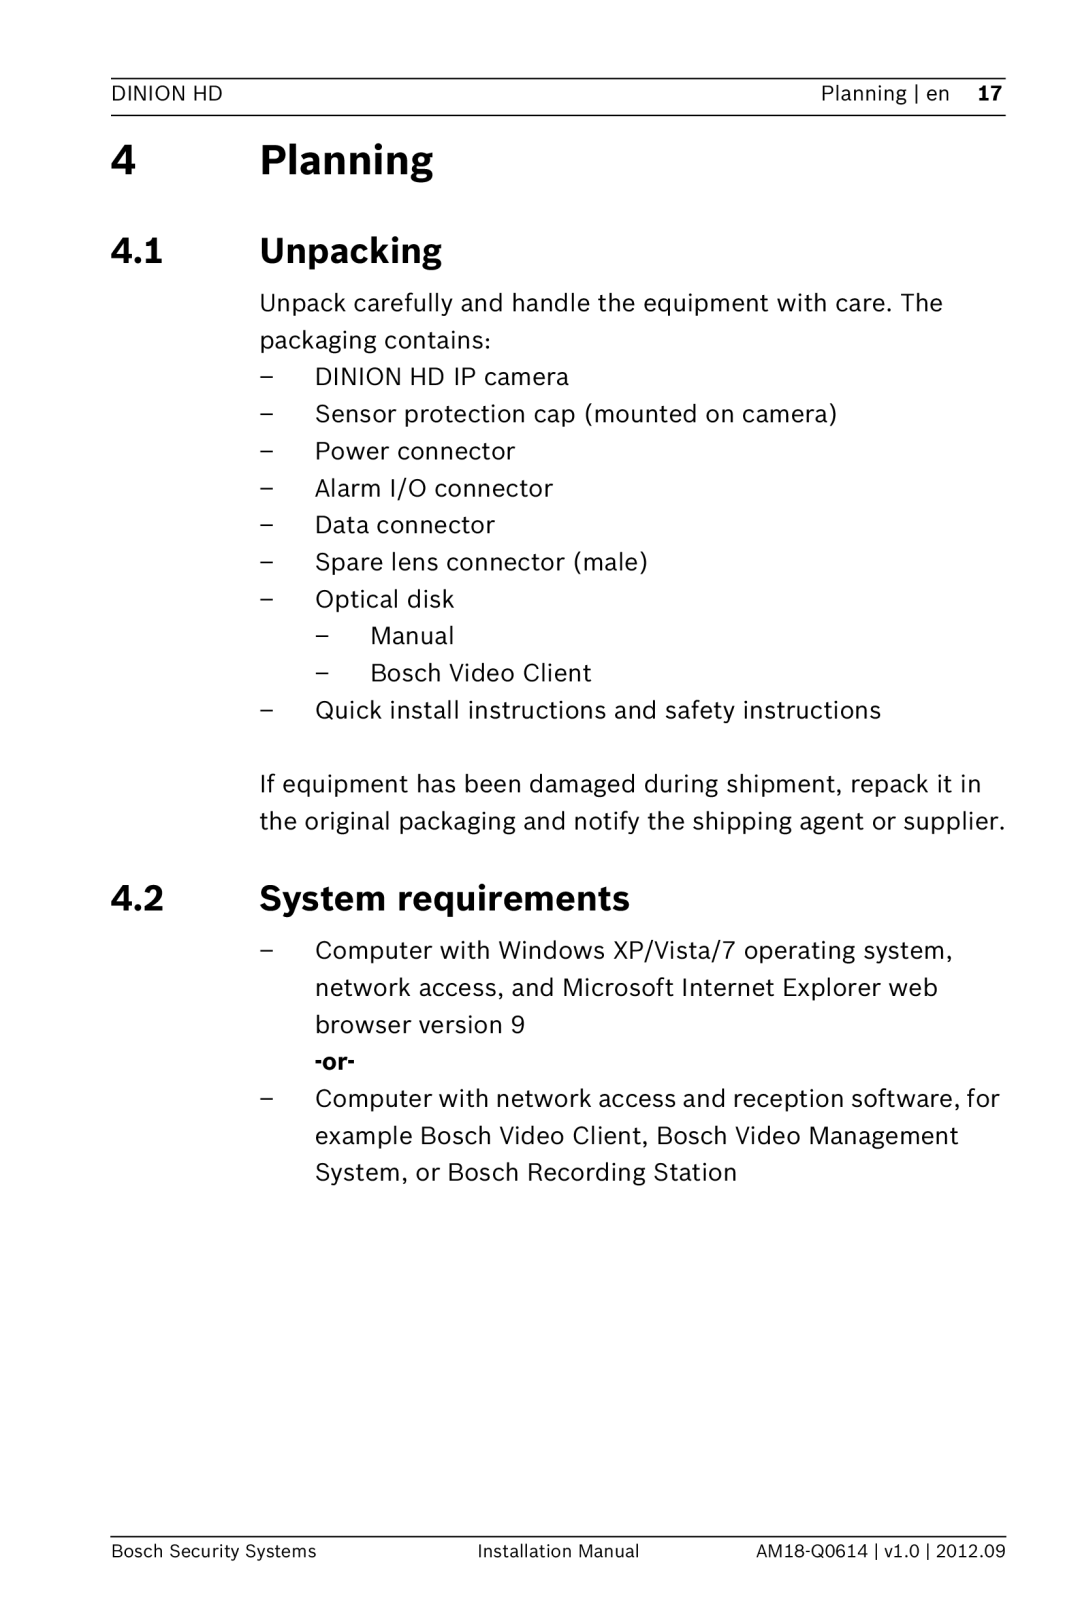 Bosch Appliances NBN-733 installation manual 4Planning, 4.1Unpacking, 4.2System requirements 